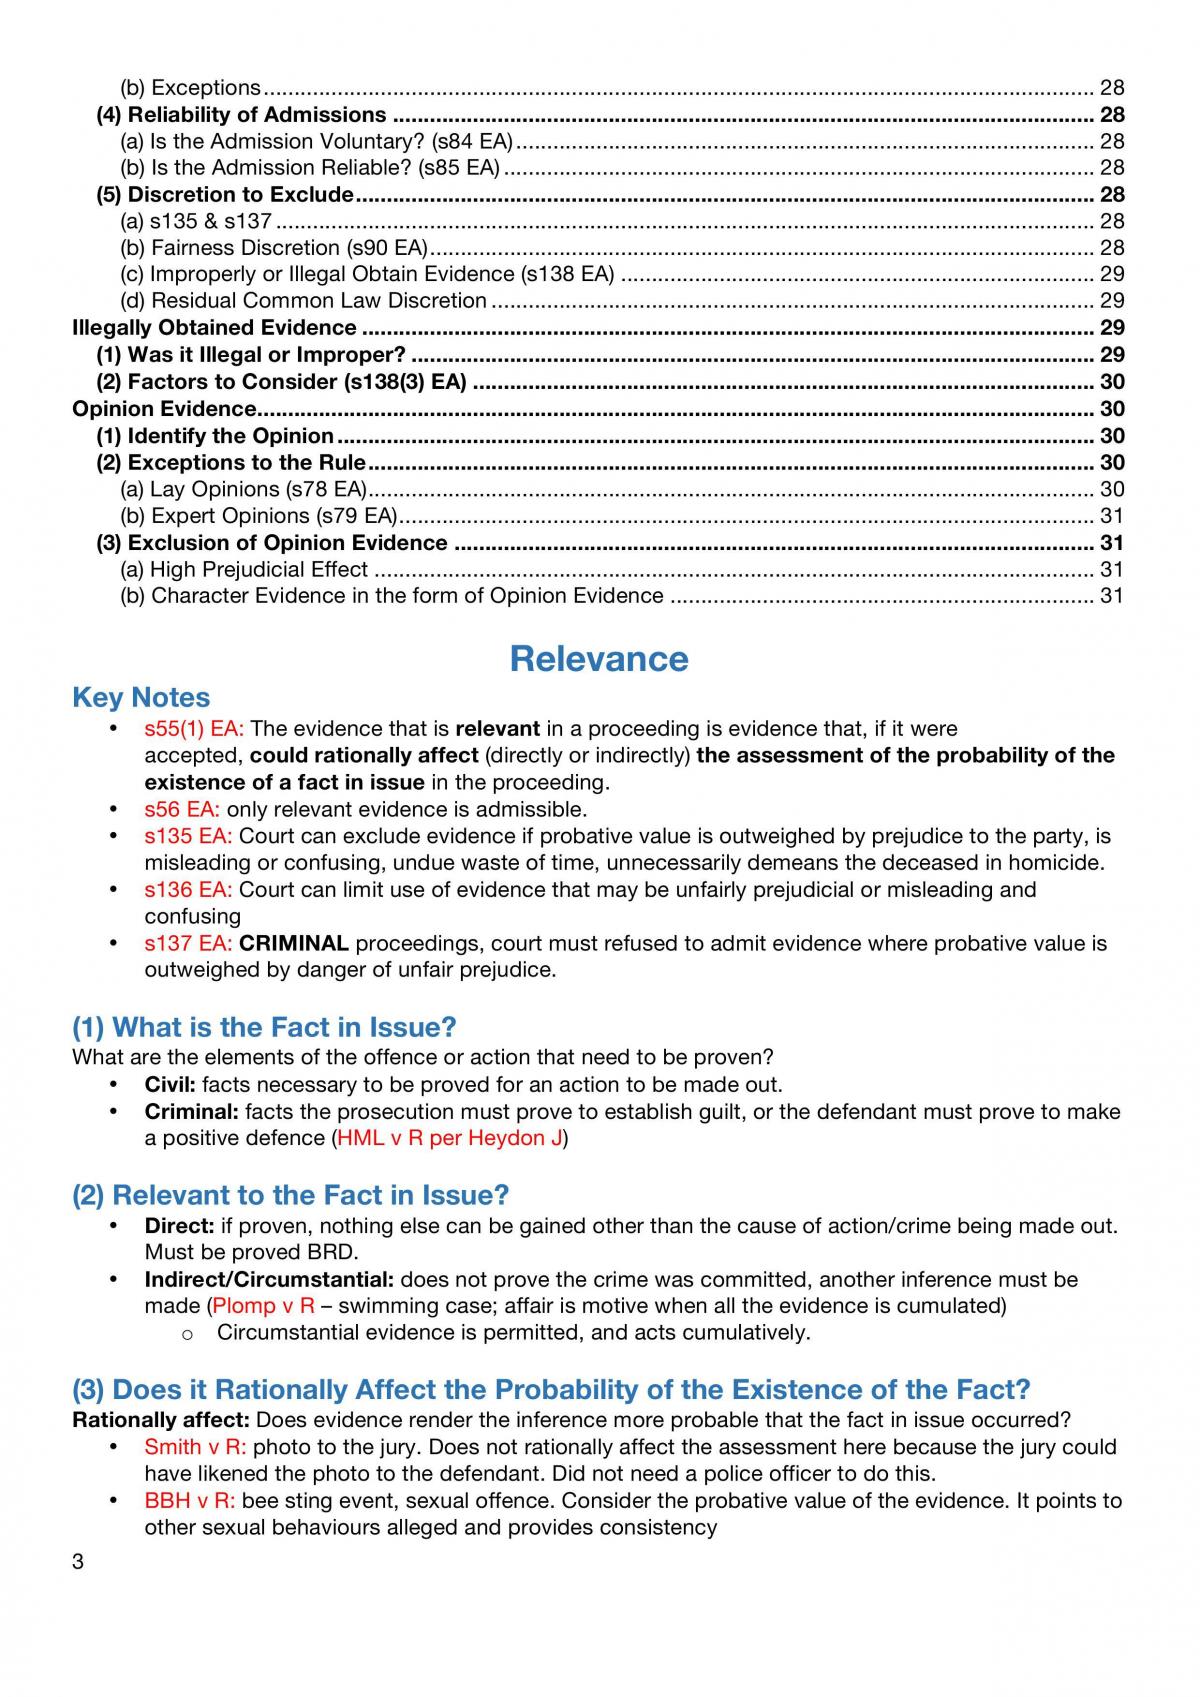 LAW4323 Evidence Exam Notes - Page 3